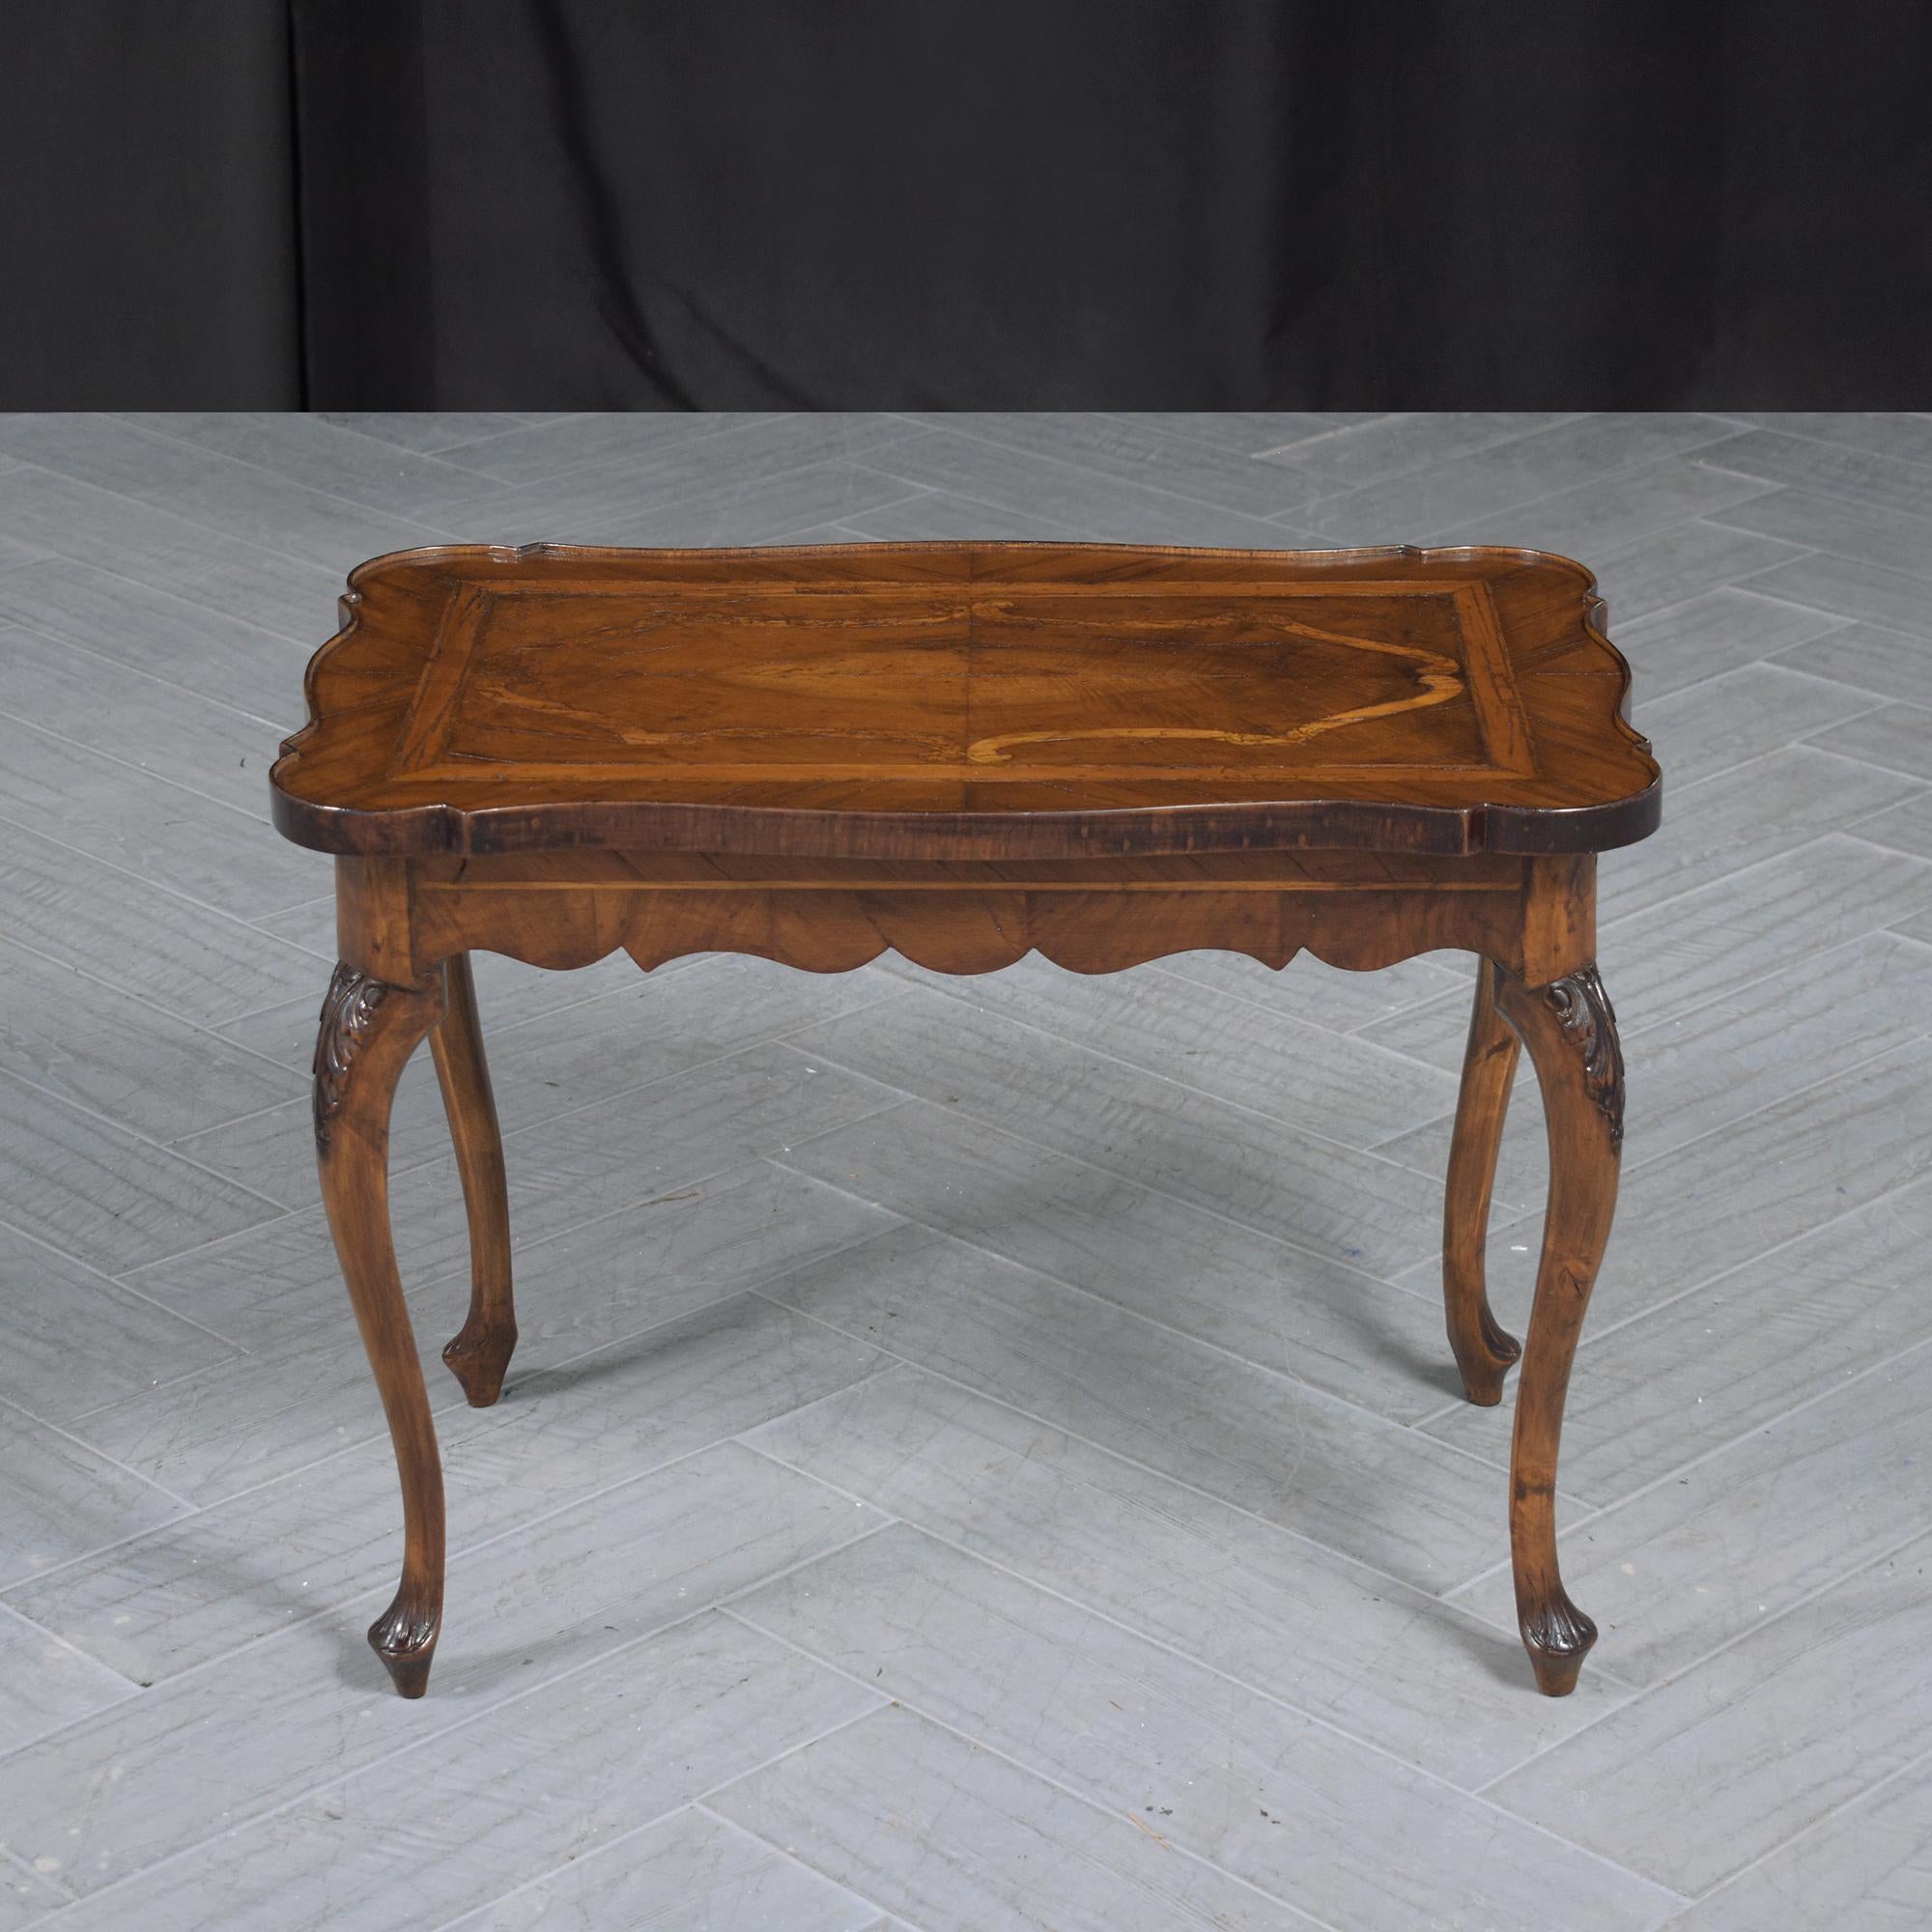 Late 19th-Century English Walnut Side Table with Inlaid Pattern In Good Condition For Sale In Los Angeles, CA